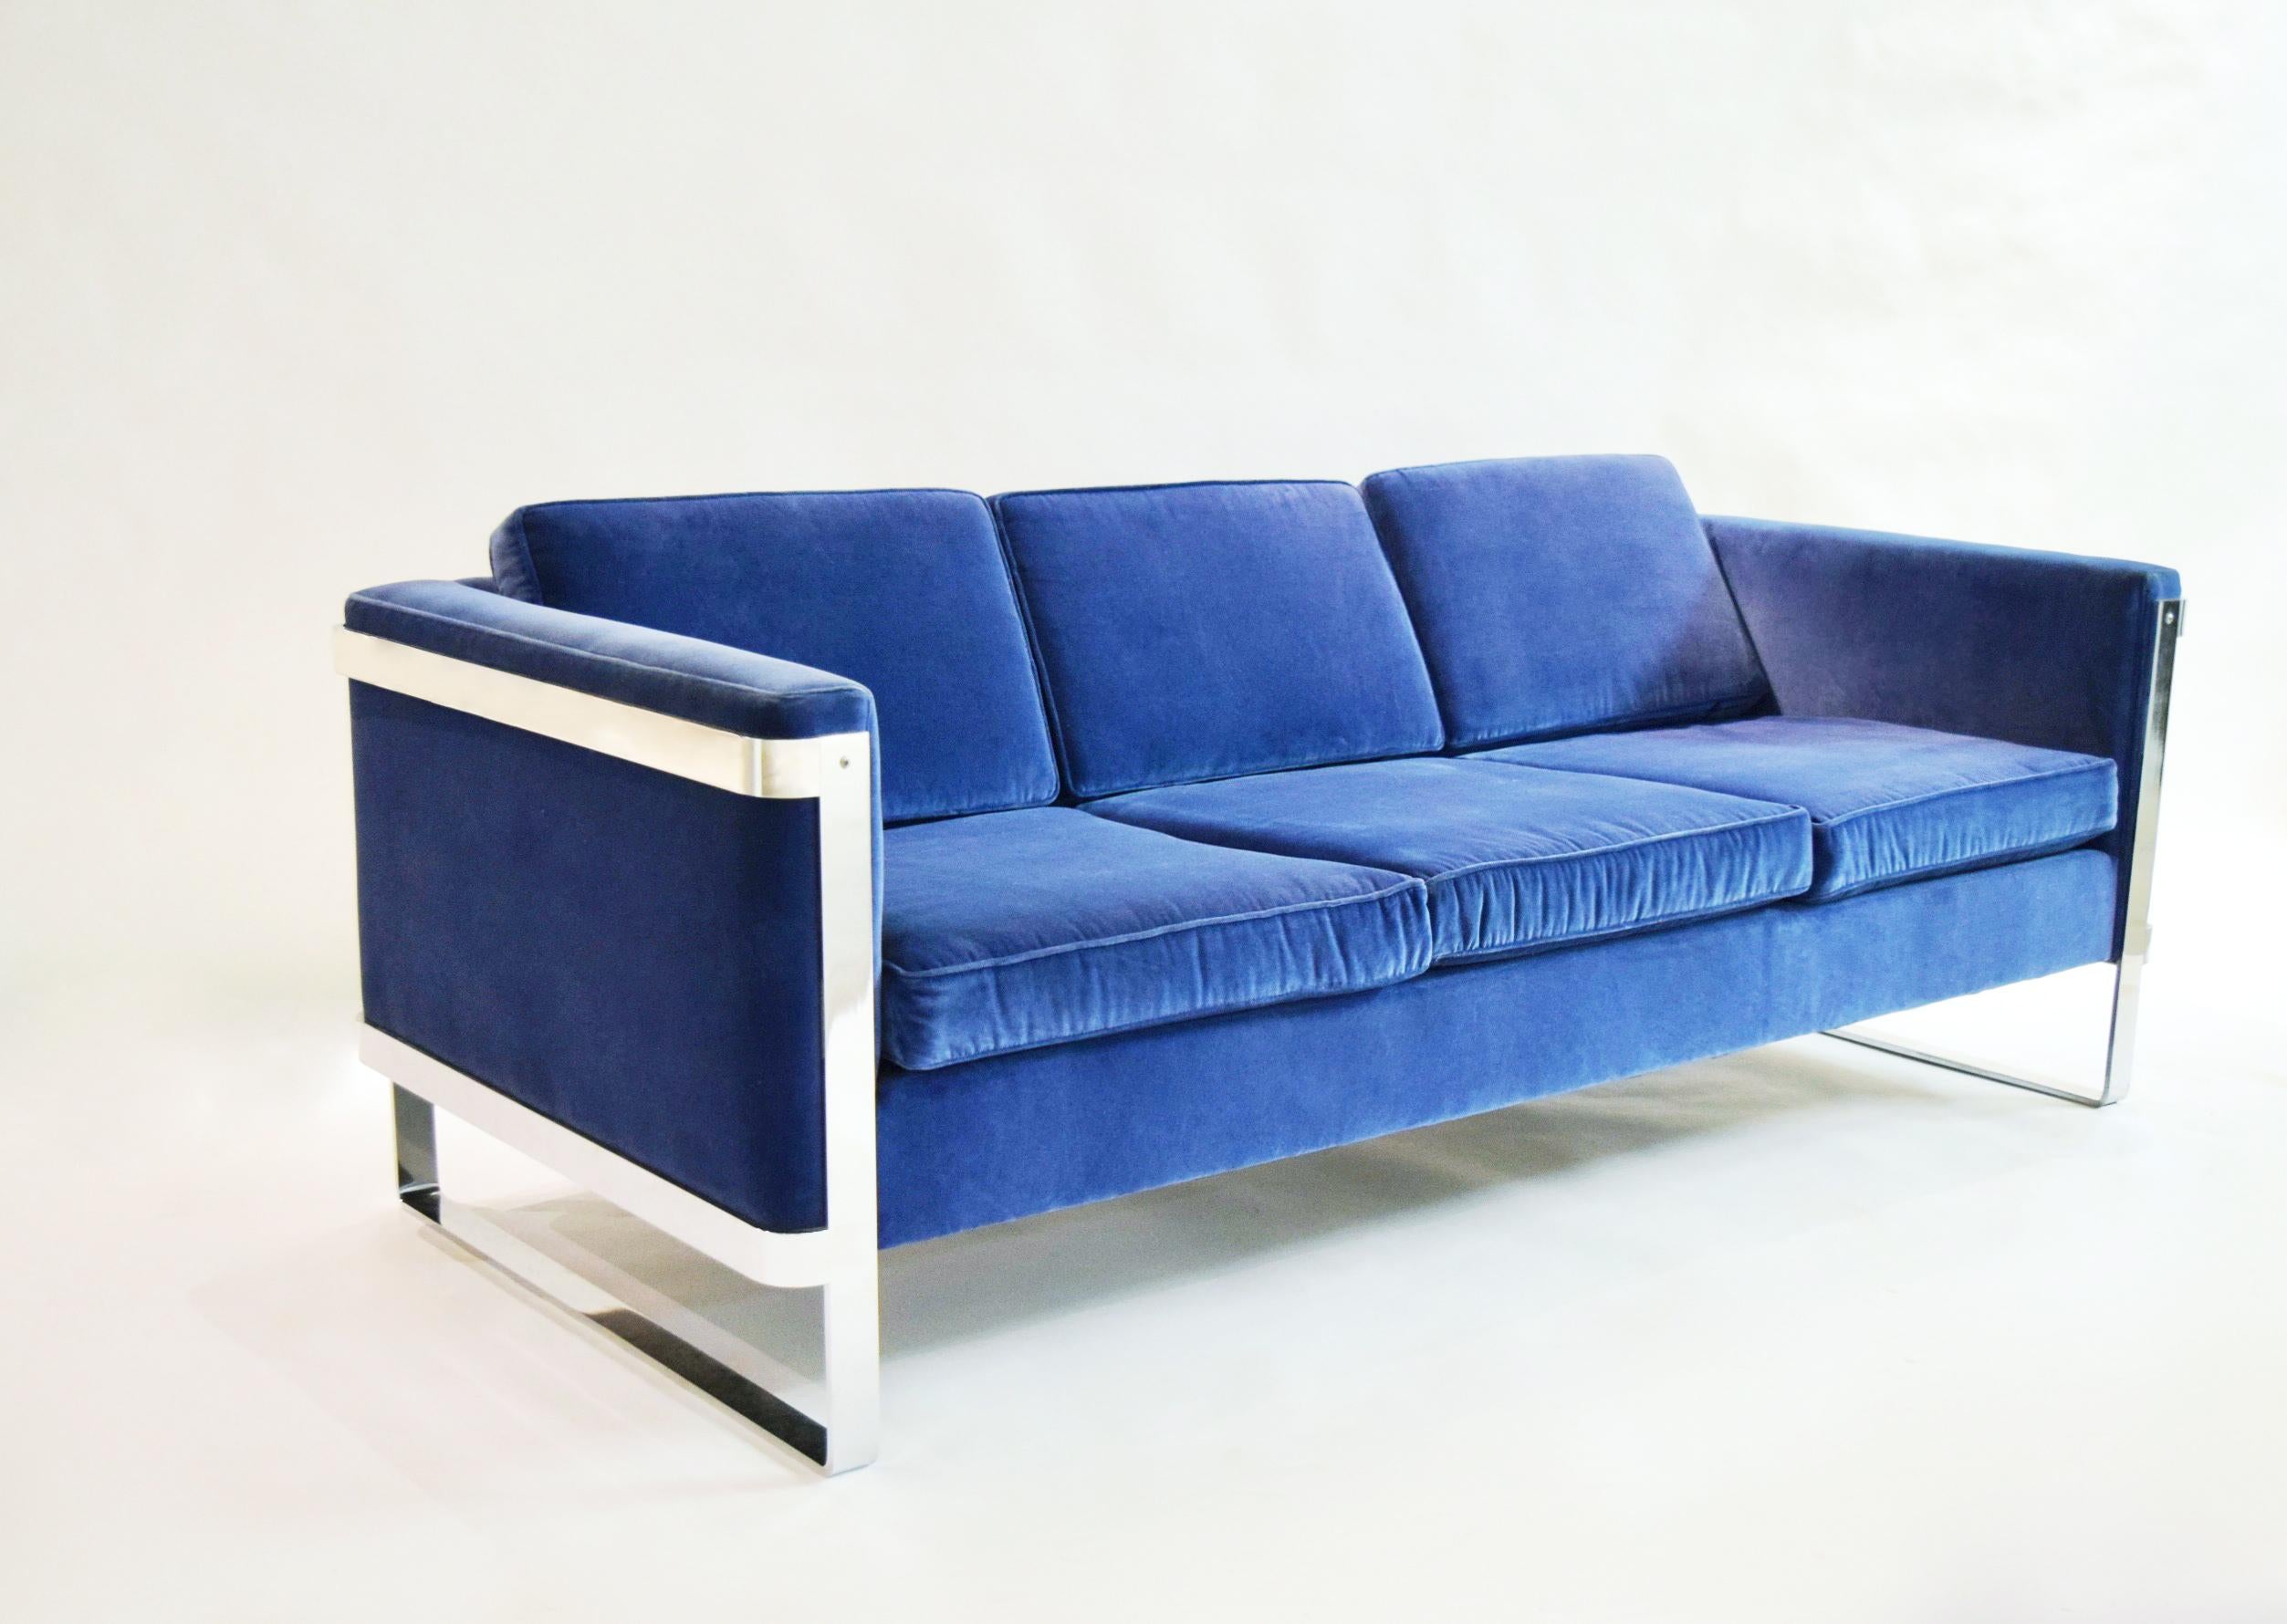 Pace Collection three-seat sofa with a solid, polished steel frame and six re-upholstered cushions in blue velvet. Arm height measures 25.5